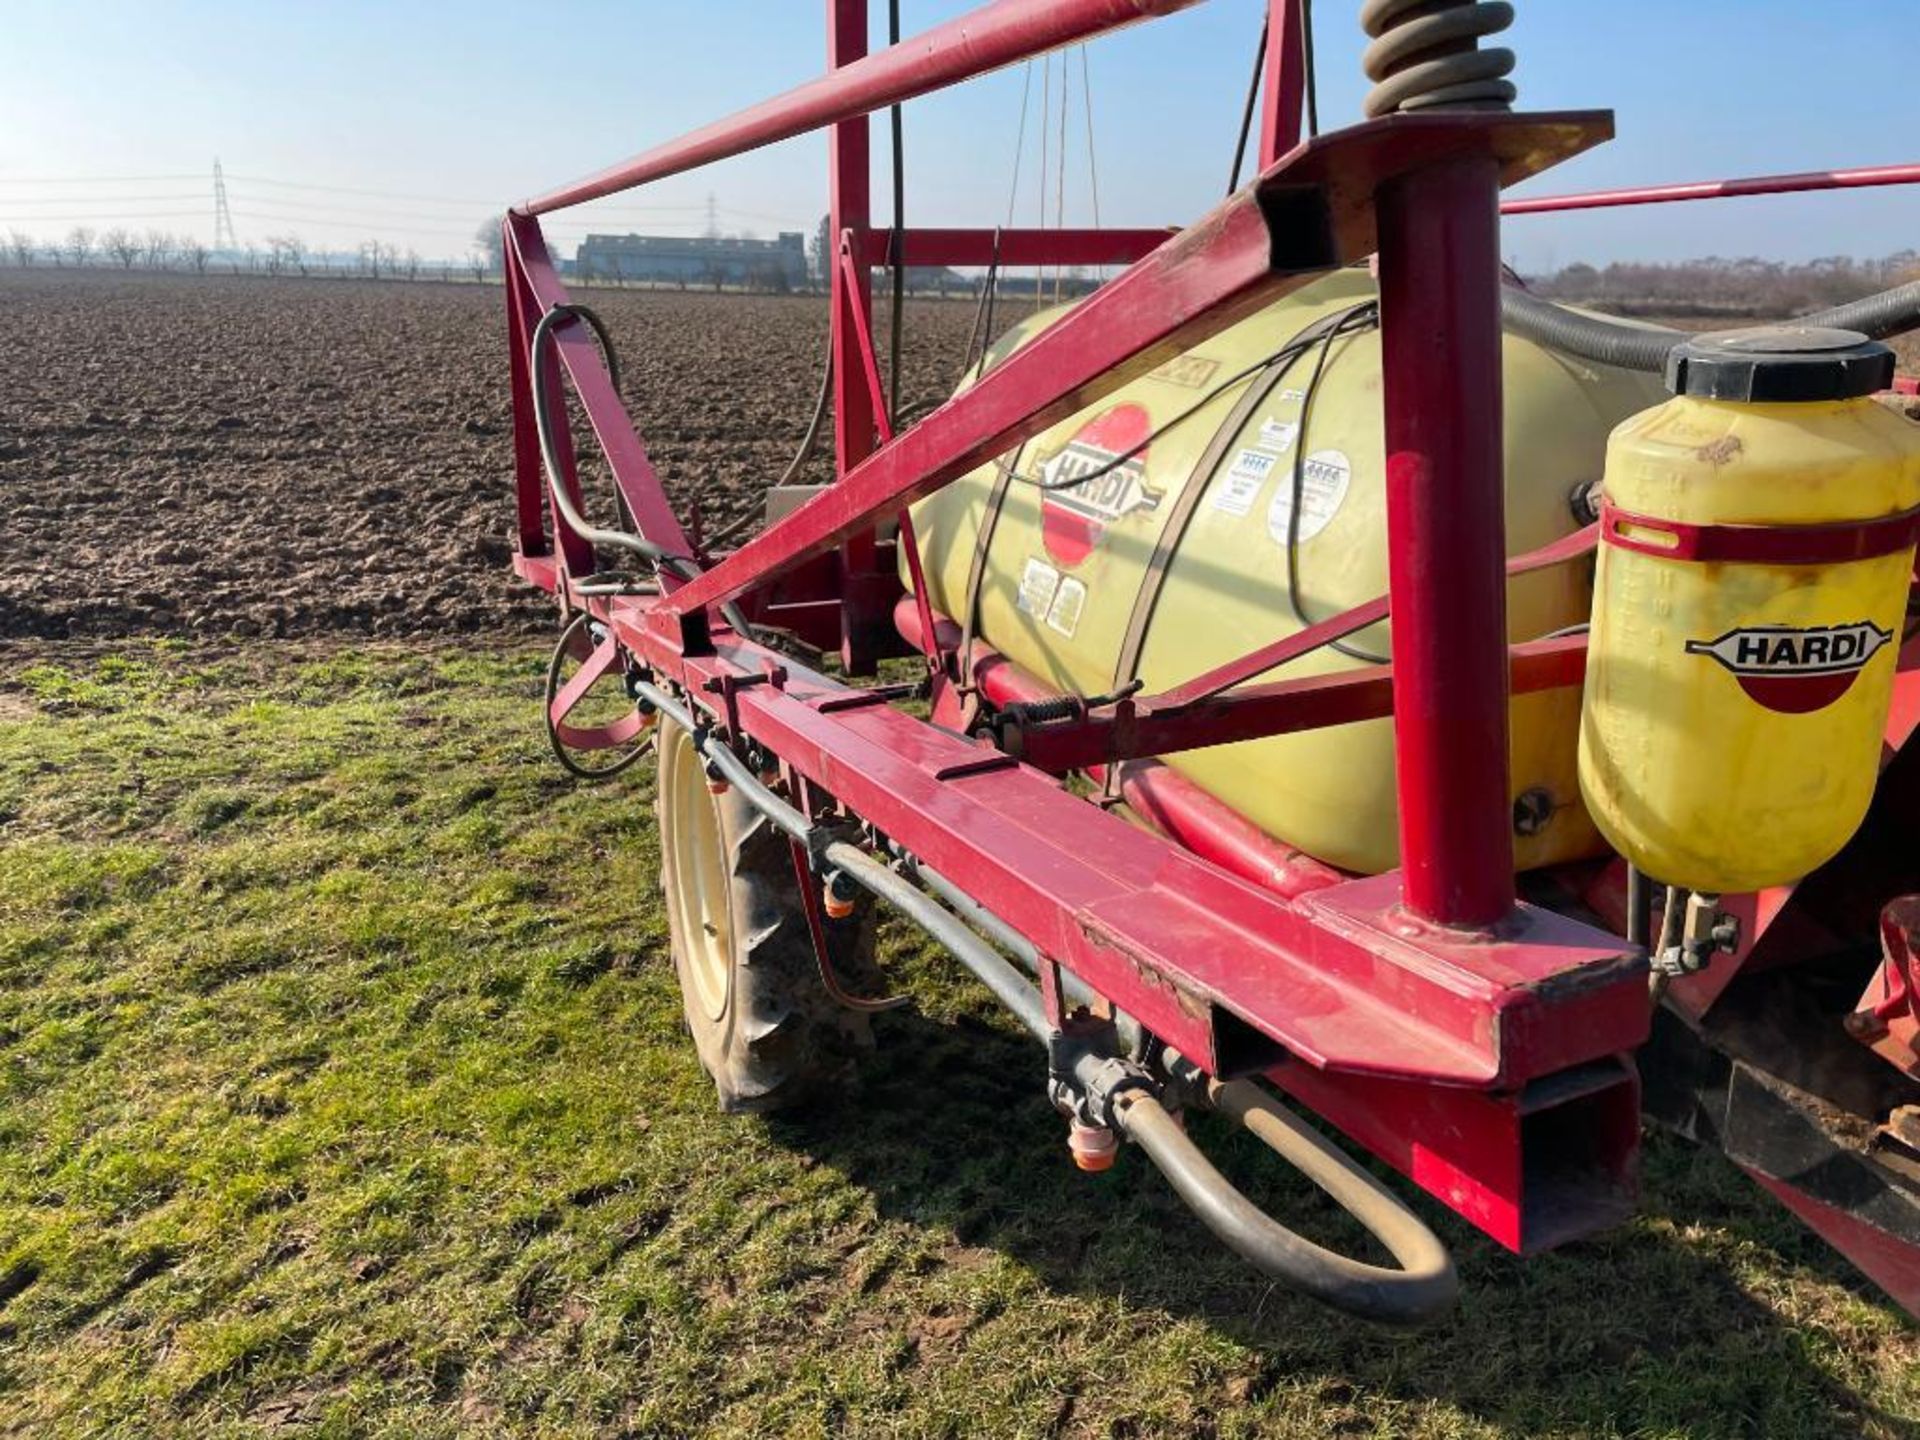 Hardi TRX1000 1000l trailed 12m sprayer with suction bowl, single nozzle lines and clean water tank - Image 3 of 8